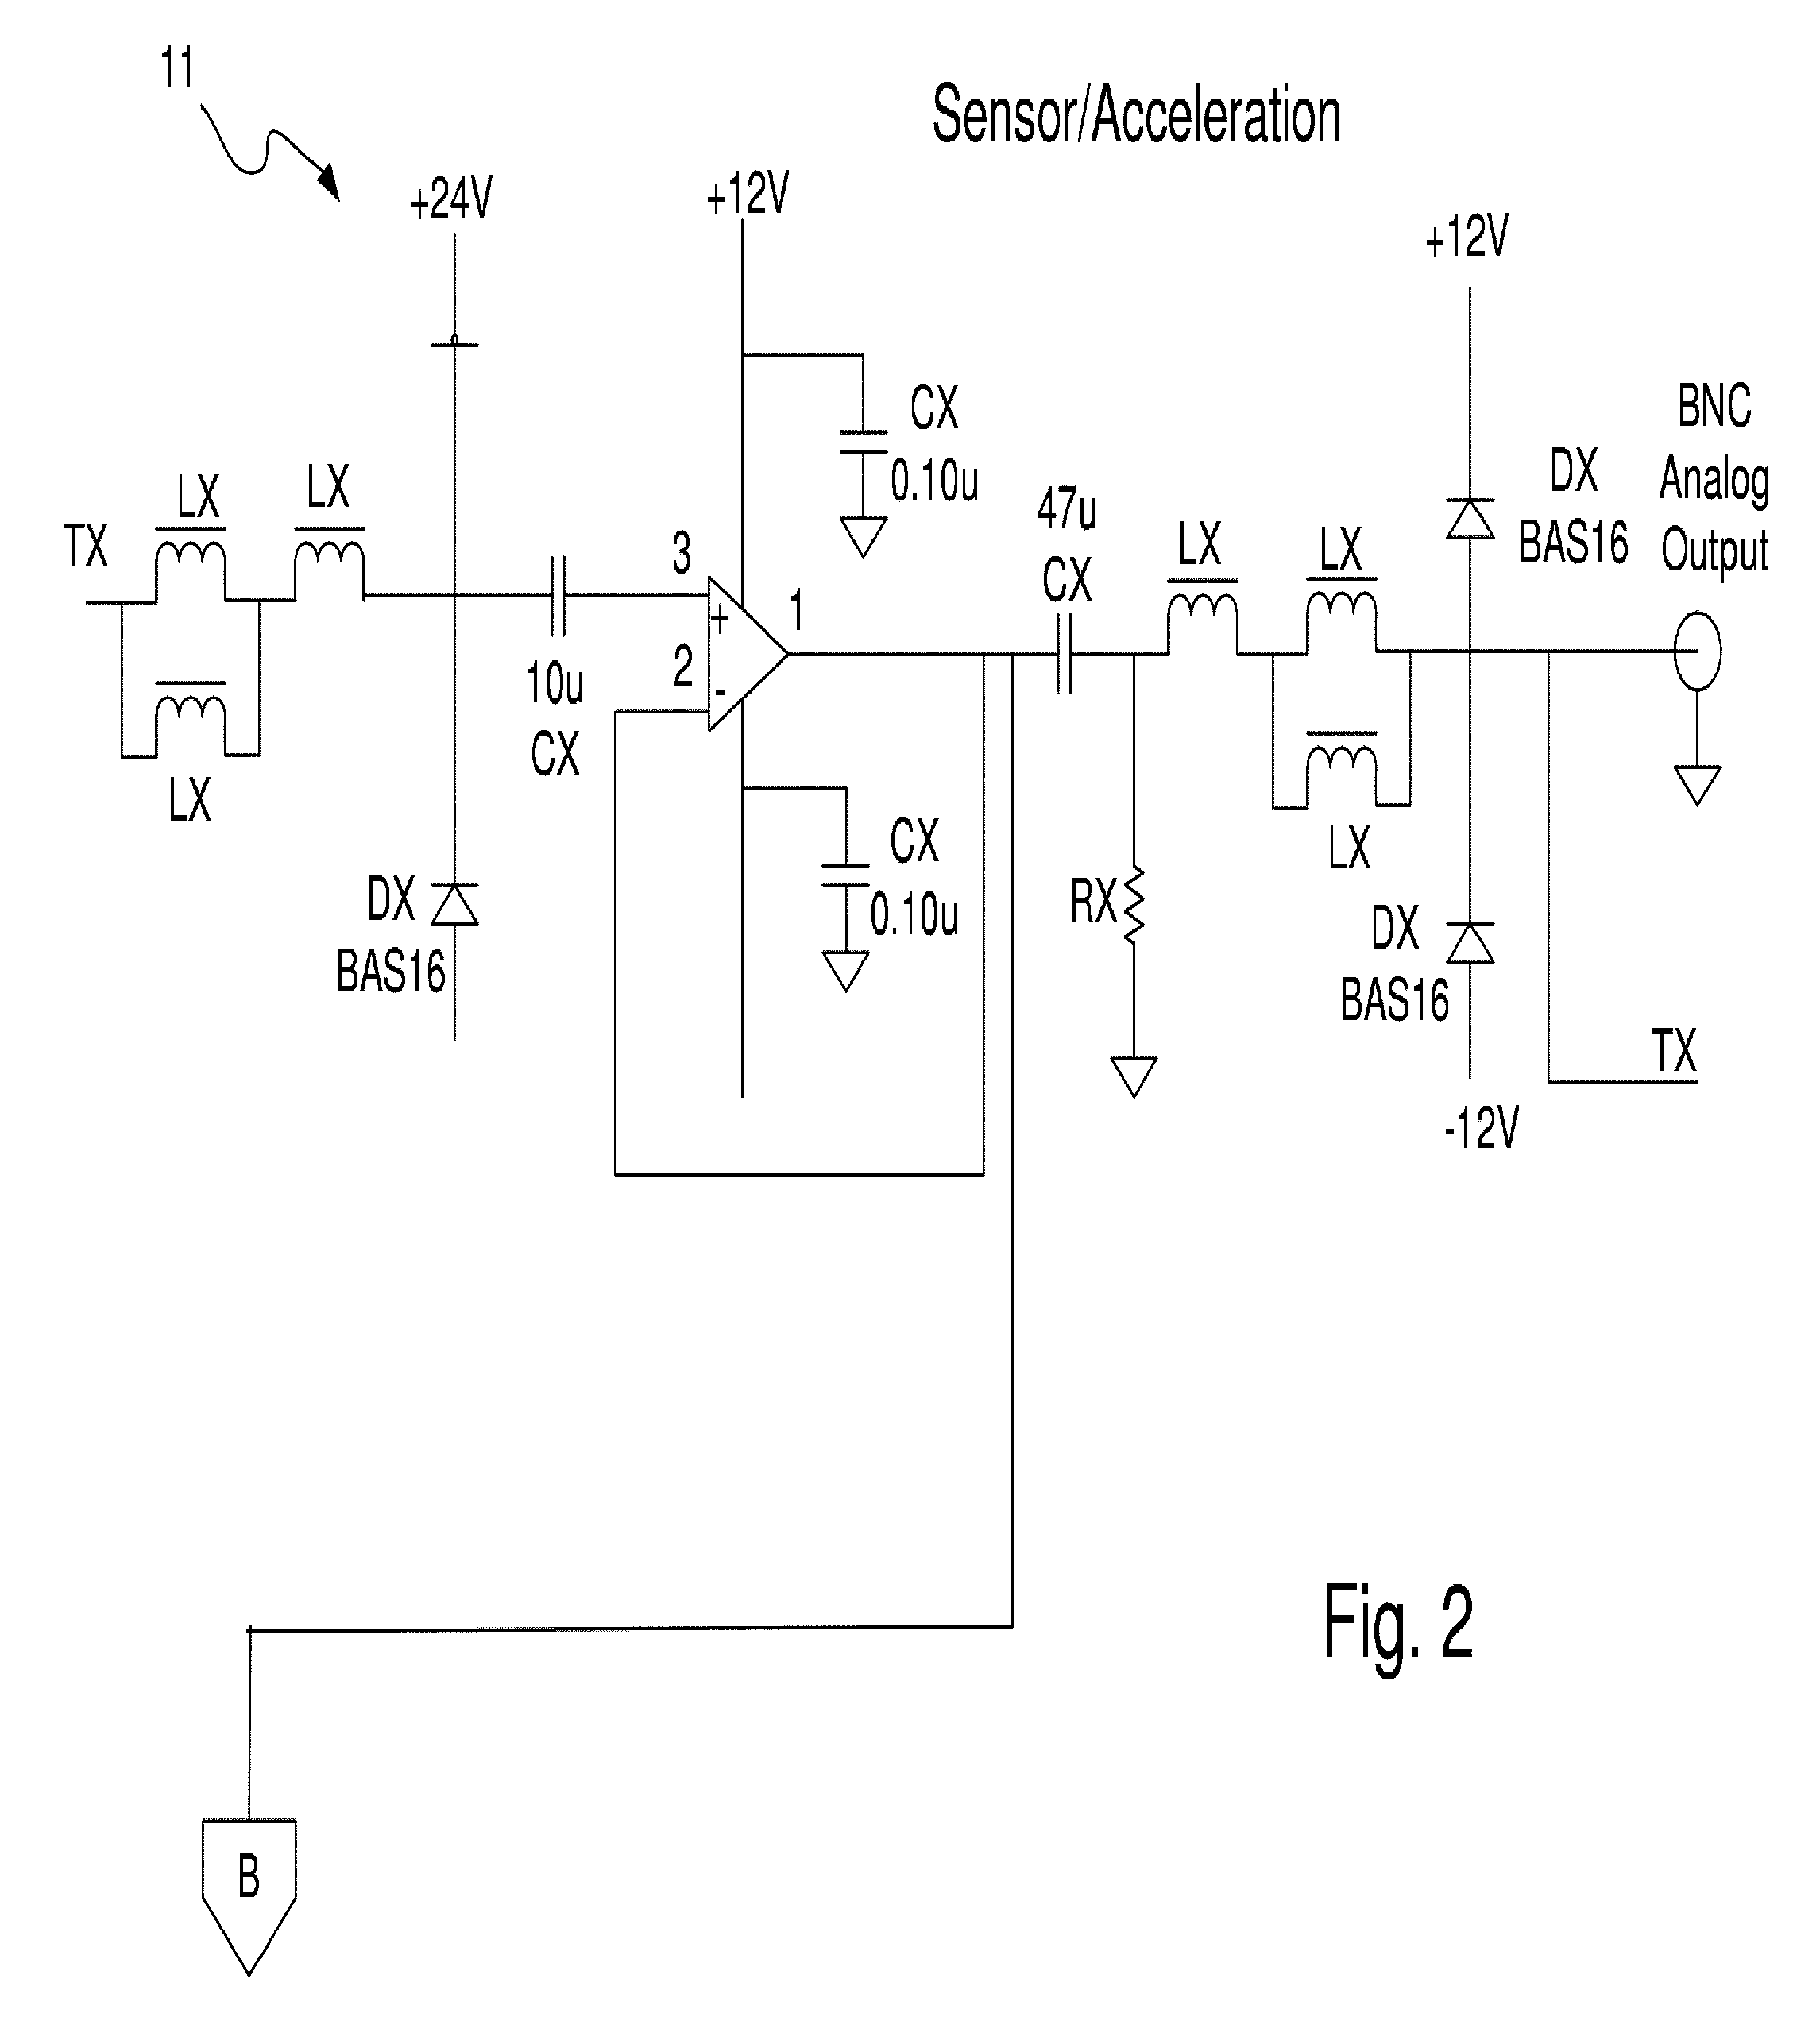 Method and apparatus for vibration sensing and analysis